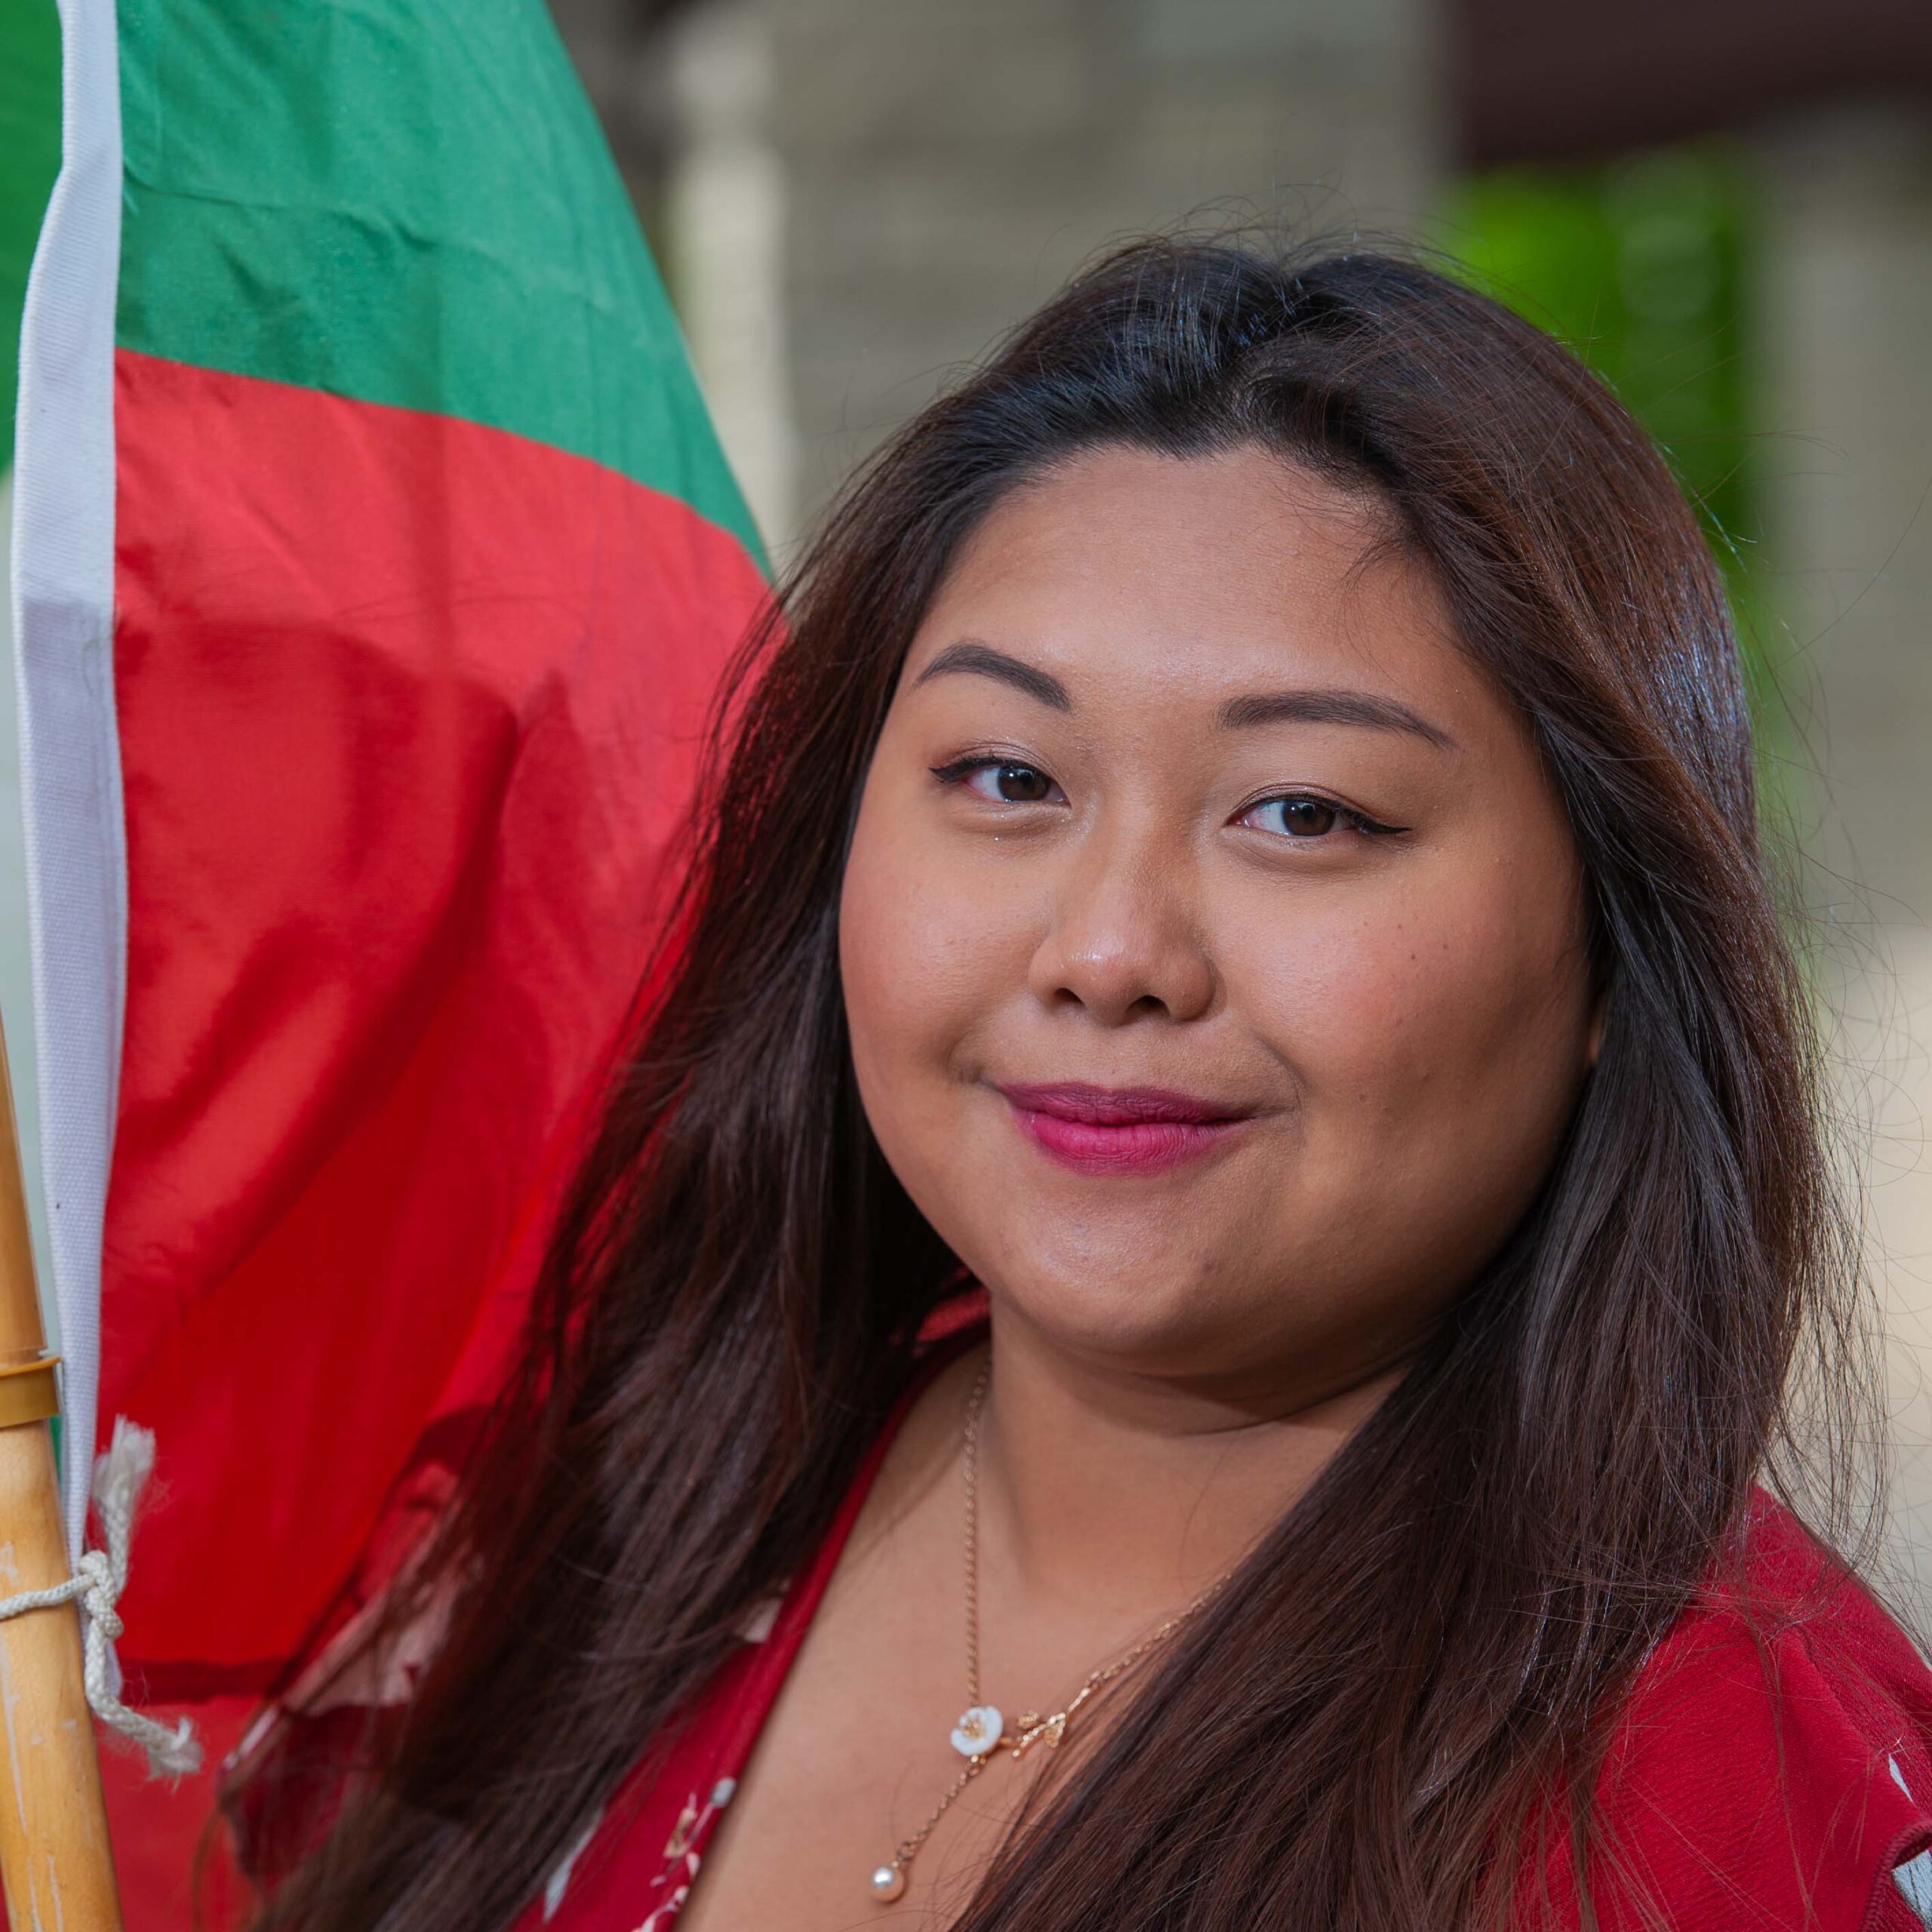 Nora stands in front of the Myanmar flag